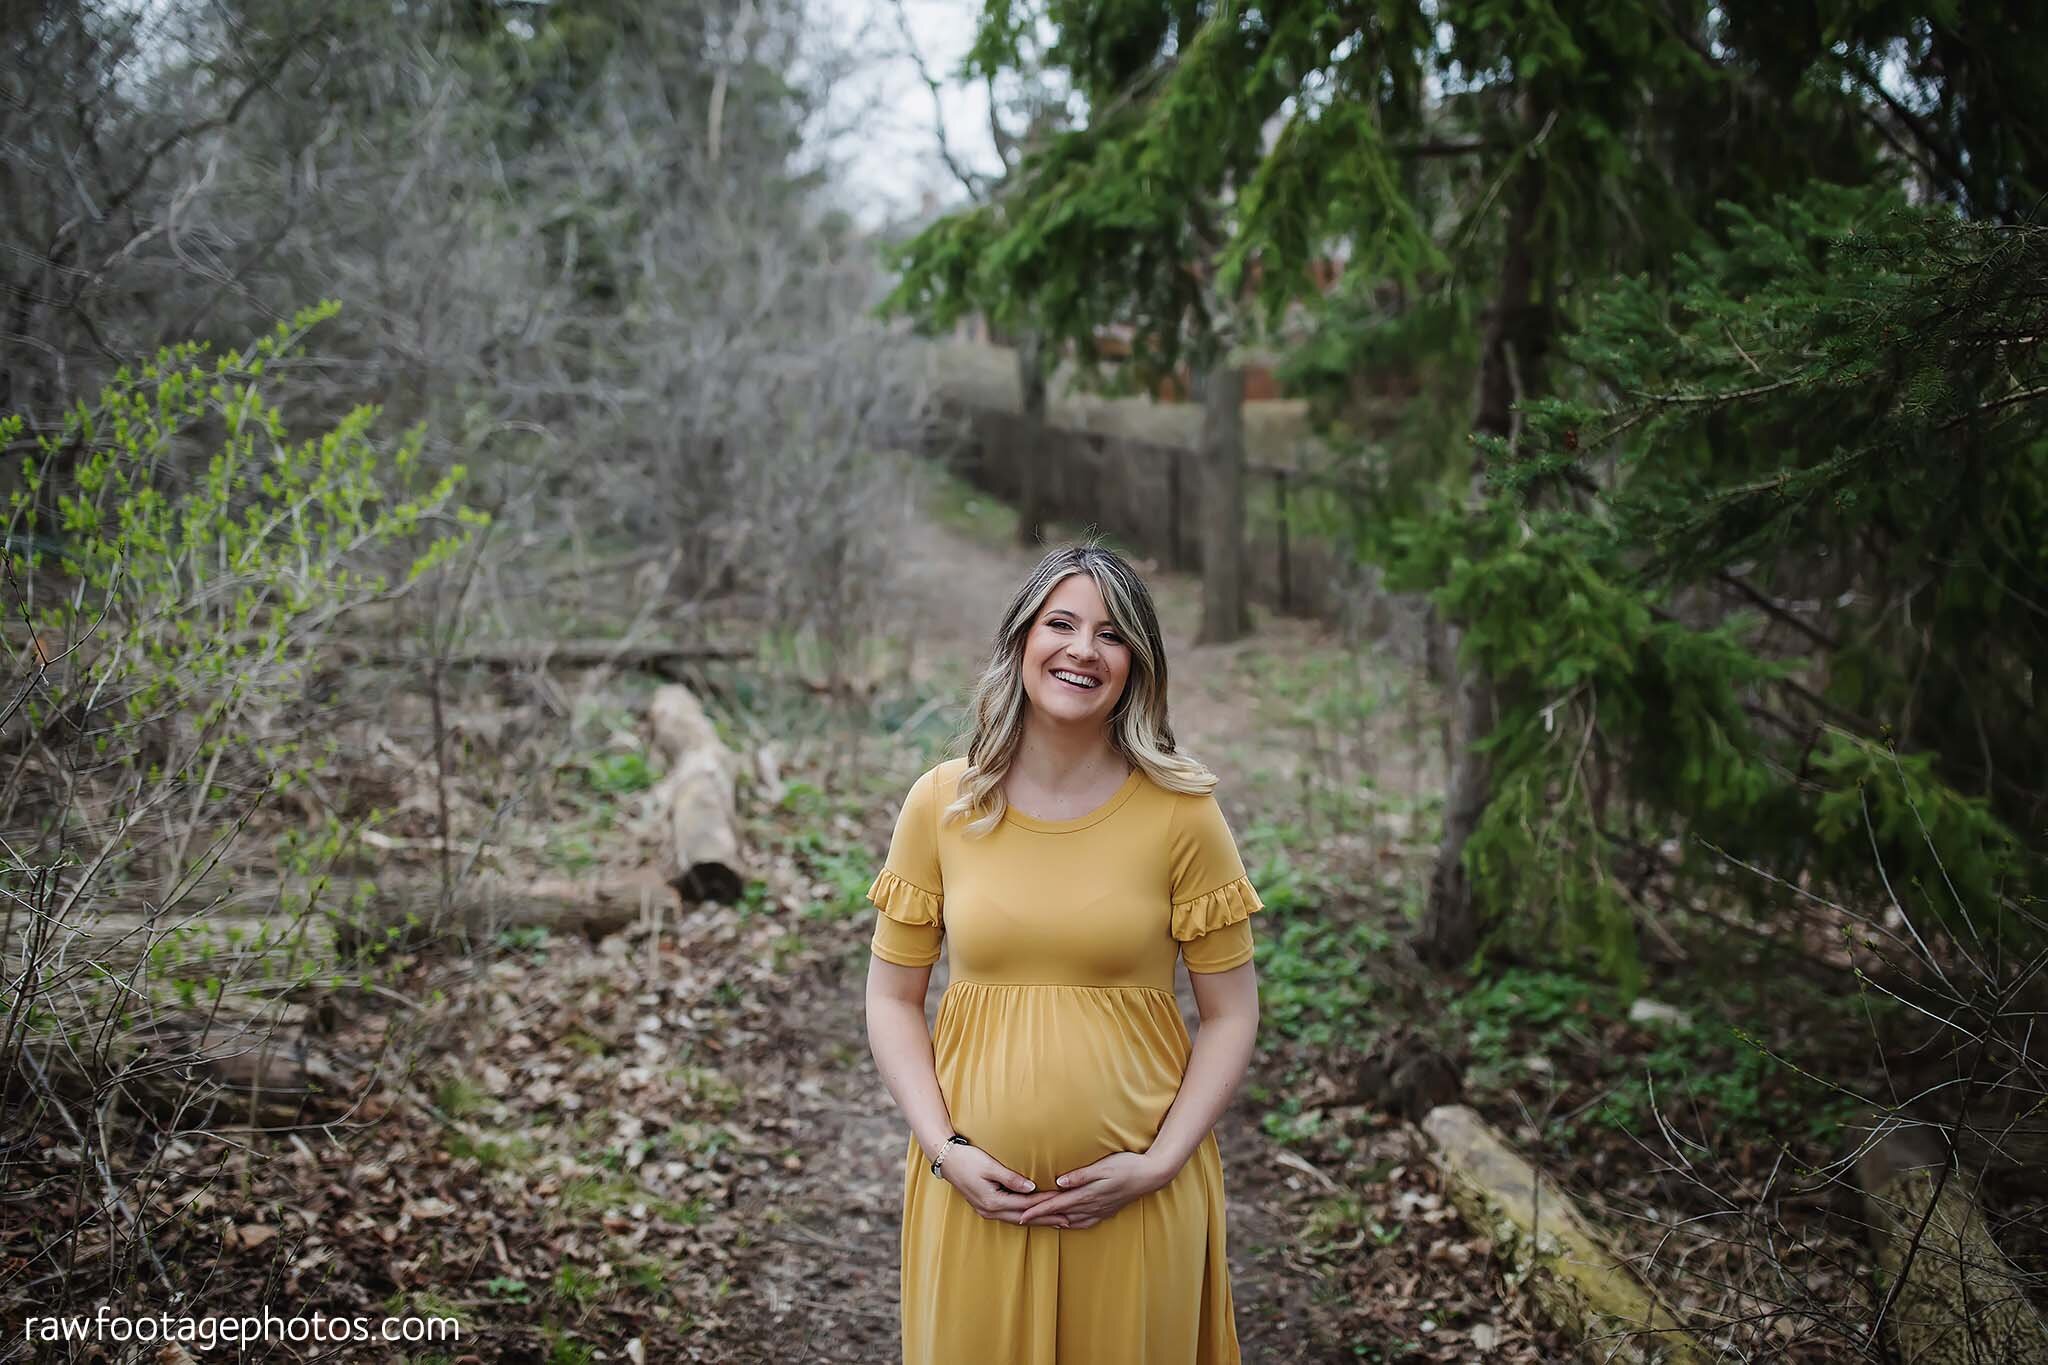 london_ontario_maternity_photographer-raw_footage_photography-in_home_lifestyle_maternity-forest_maternity_session-yellow_maternity_dress_032.jpg